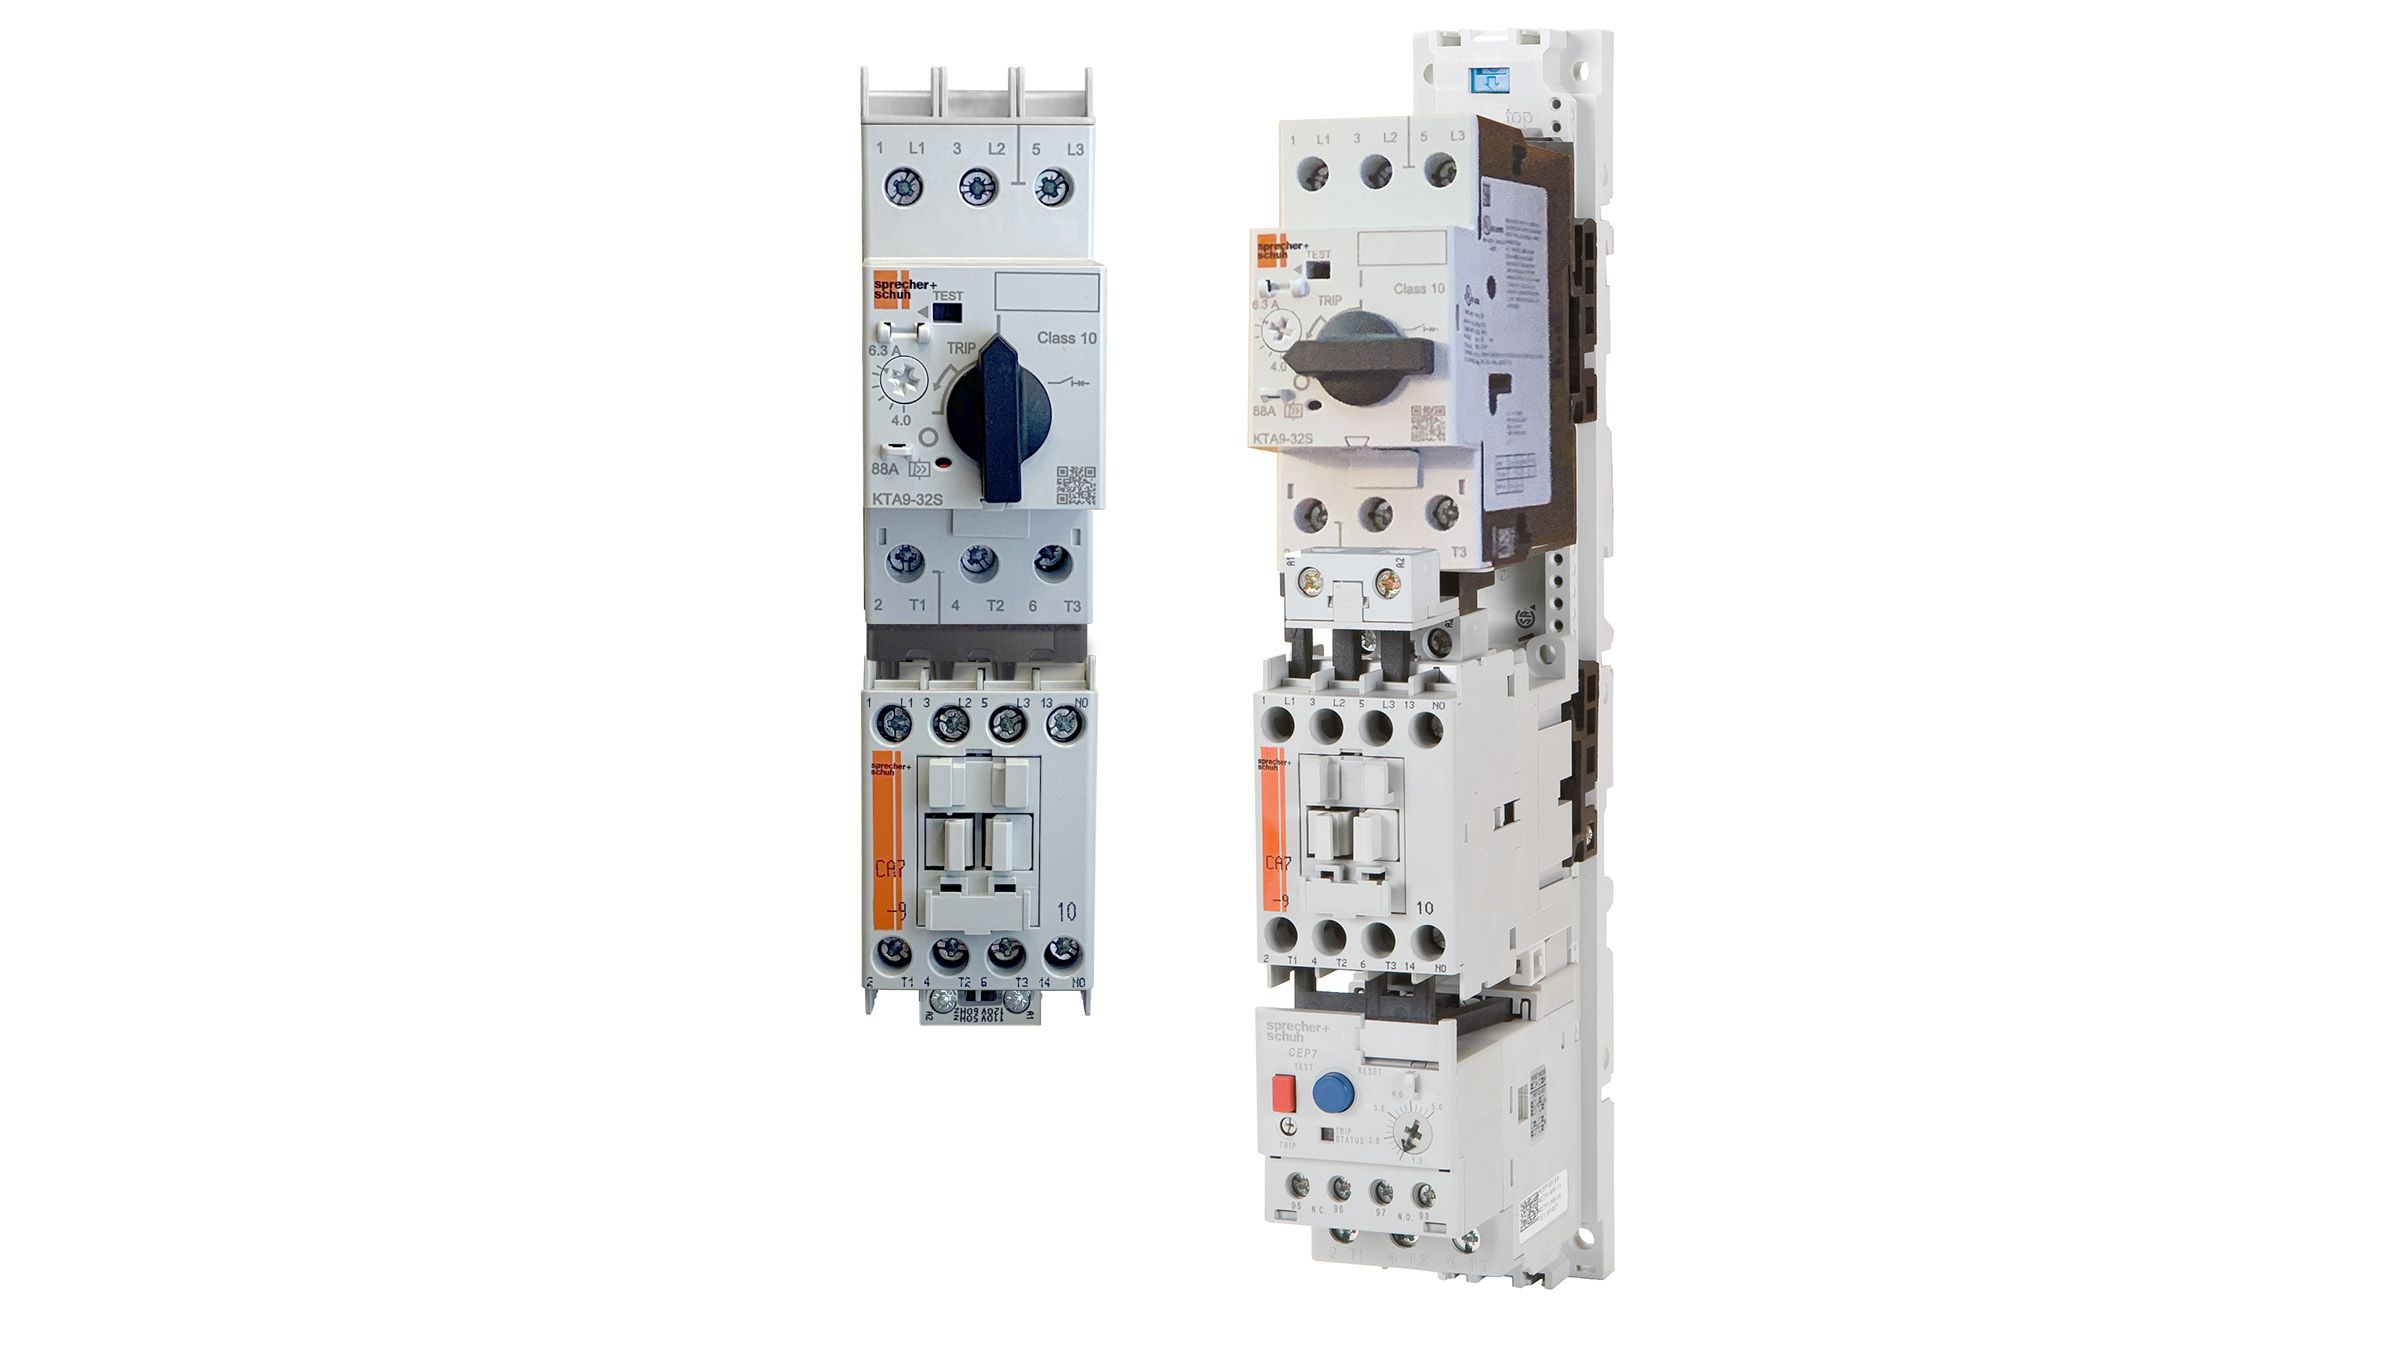 The space saving combination, self-protected controller for single or multi-motor starter applications